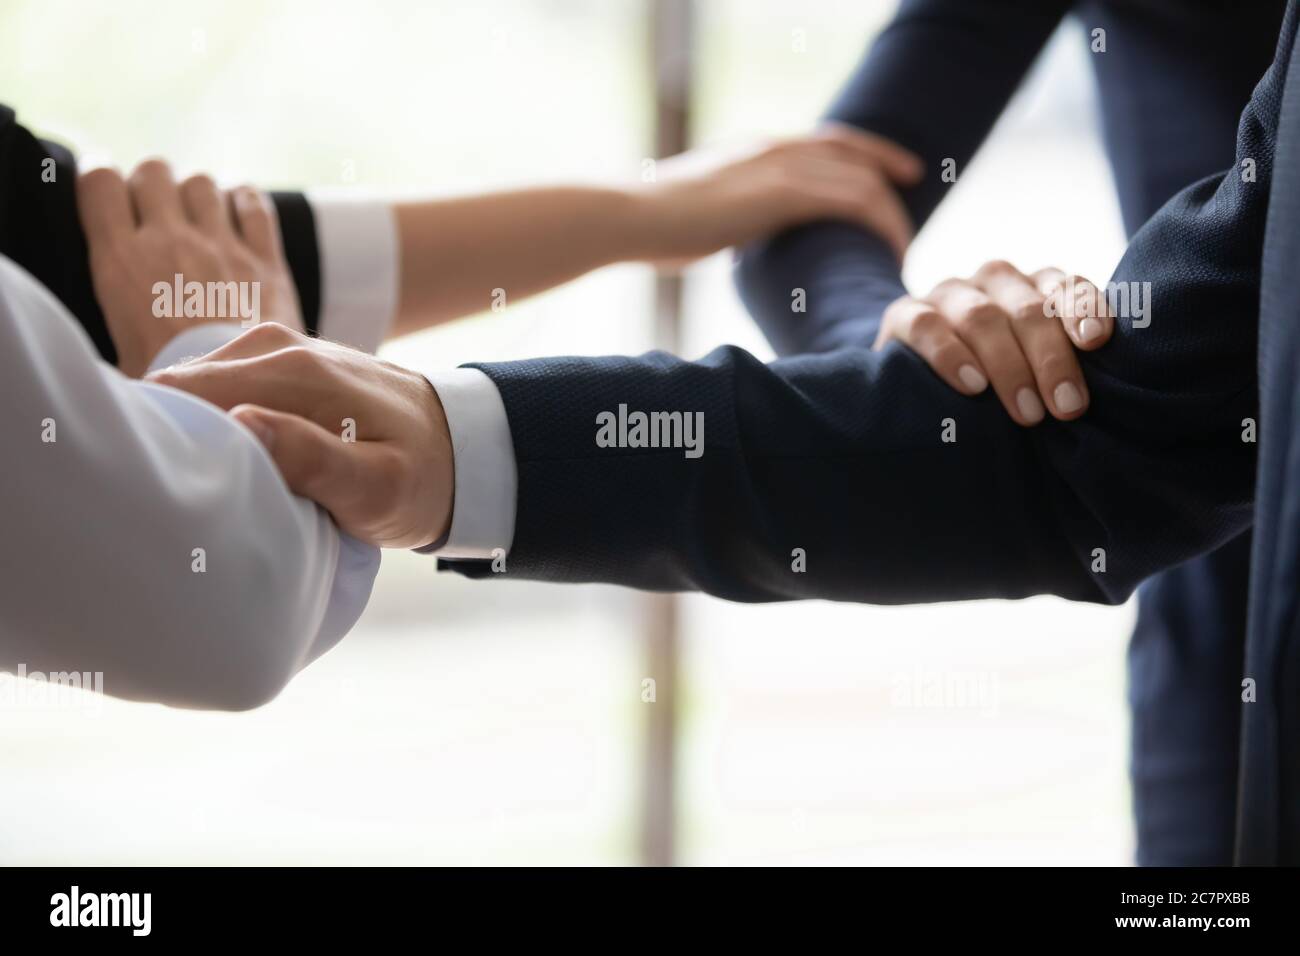 Businesspeople standing shoulder by shoulder showing unity closeup image Stock Photo